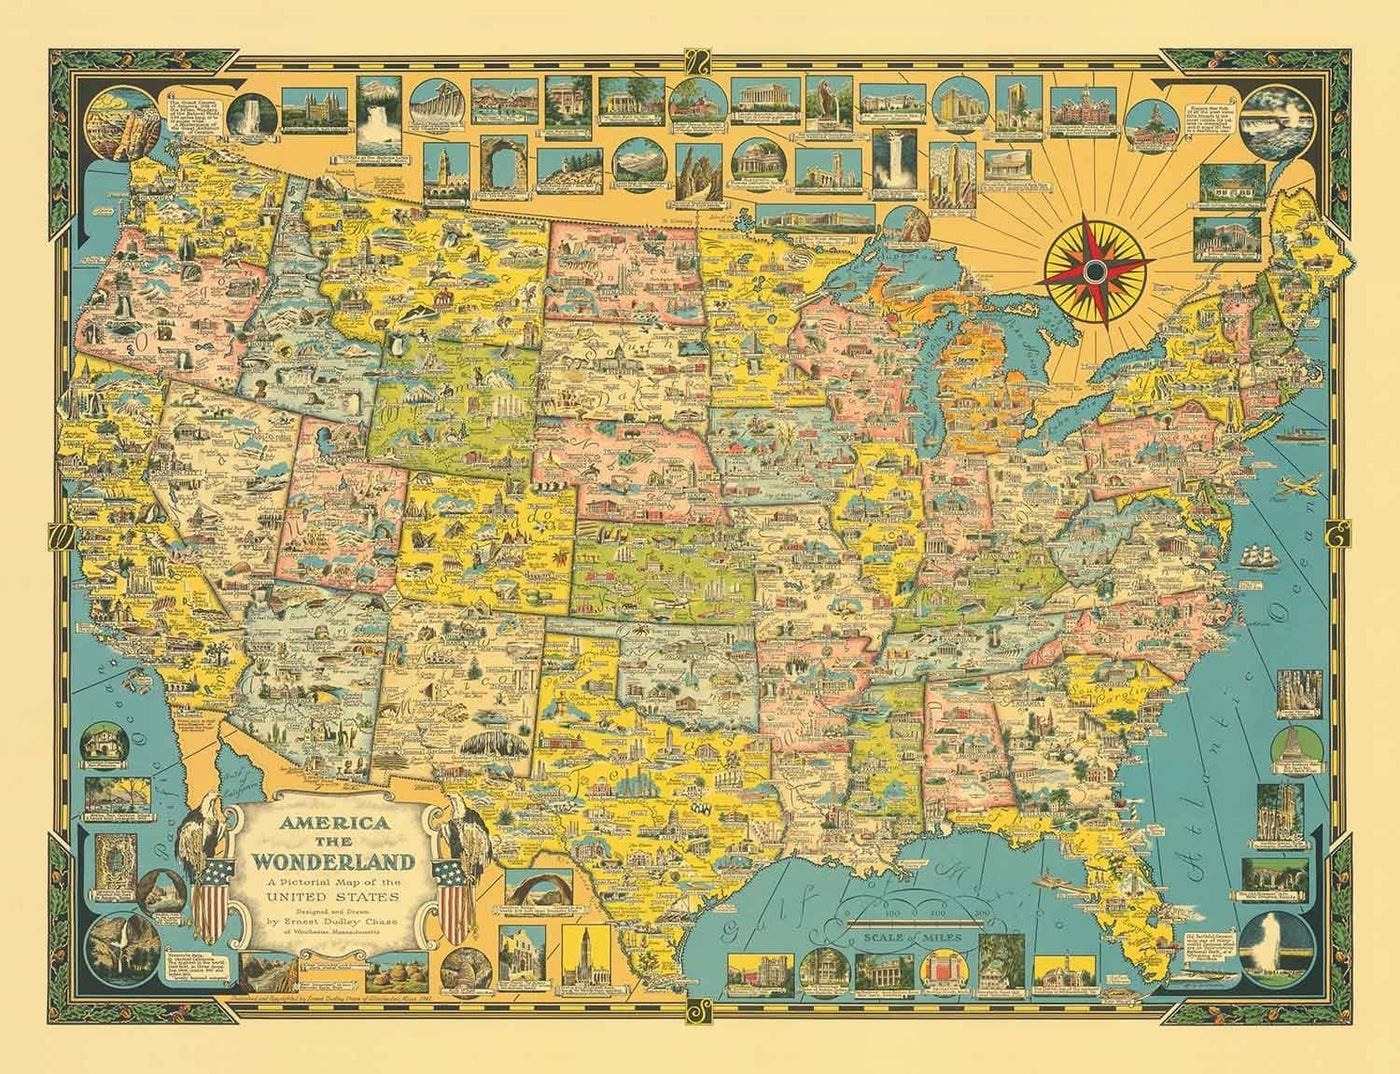 Old Pictorial Map of USA, 1941 by E. Chase - "America the Wonderland" - Illustrated Landmarks, Natural Wonders